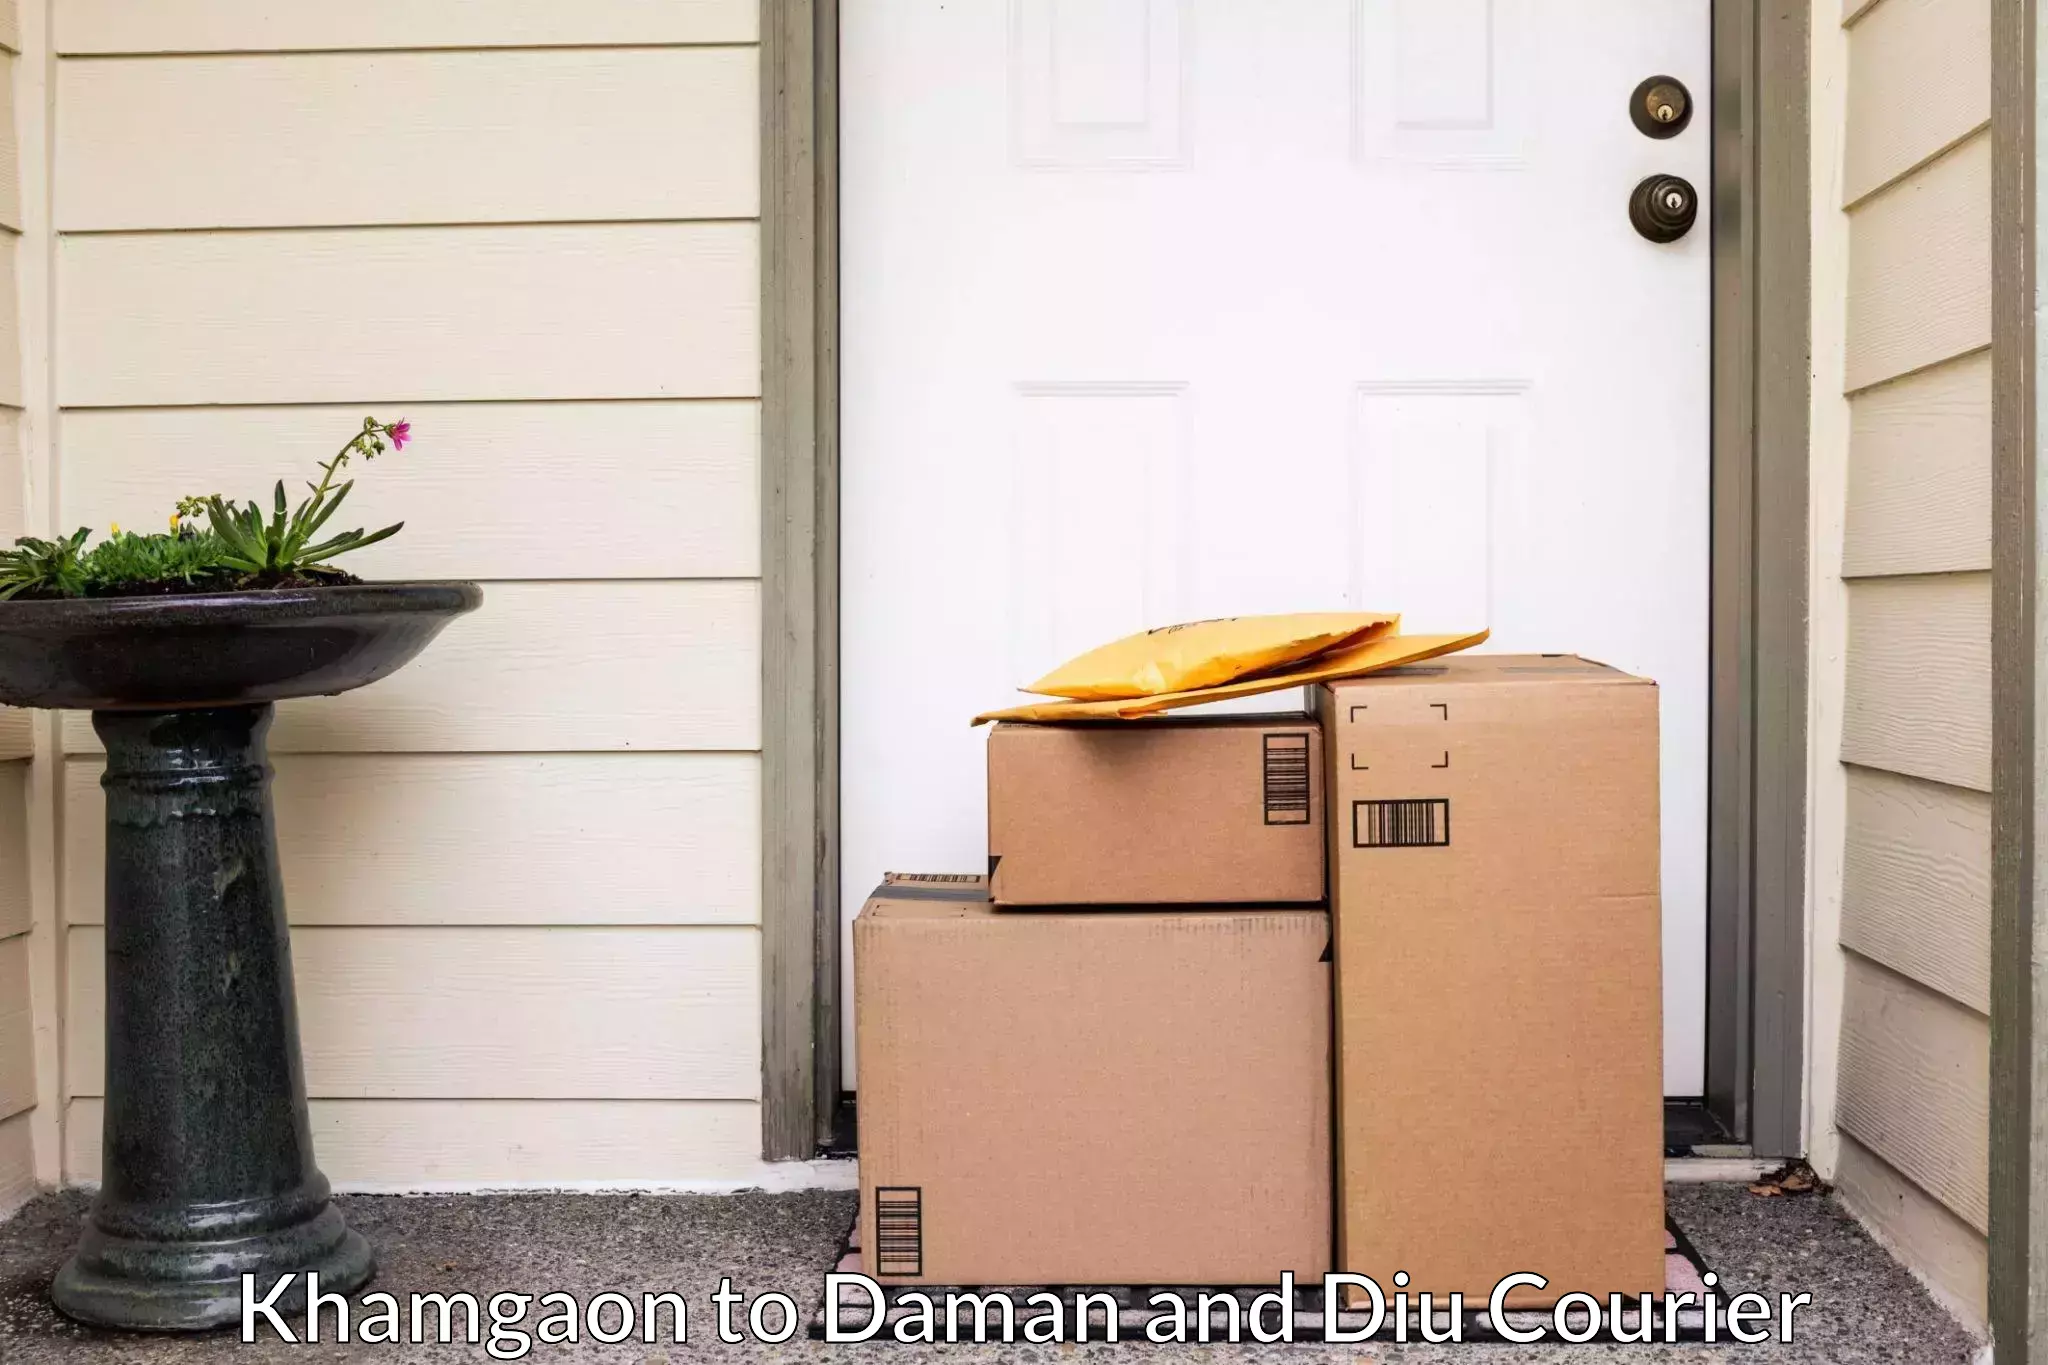 Quality relocation assistance Khamgaon to Daman and Diu